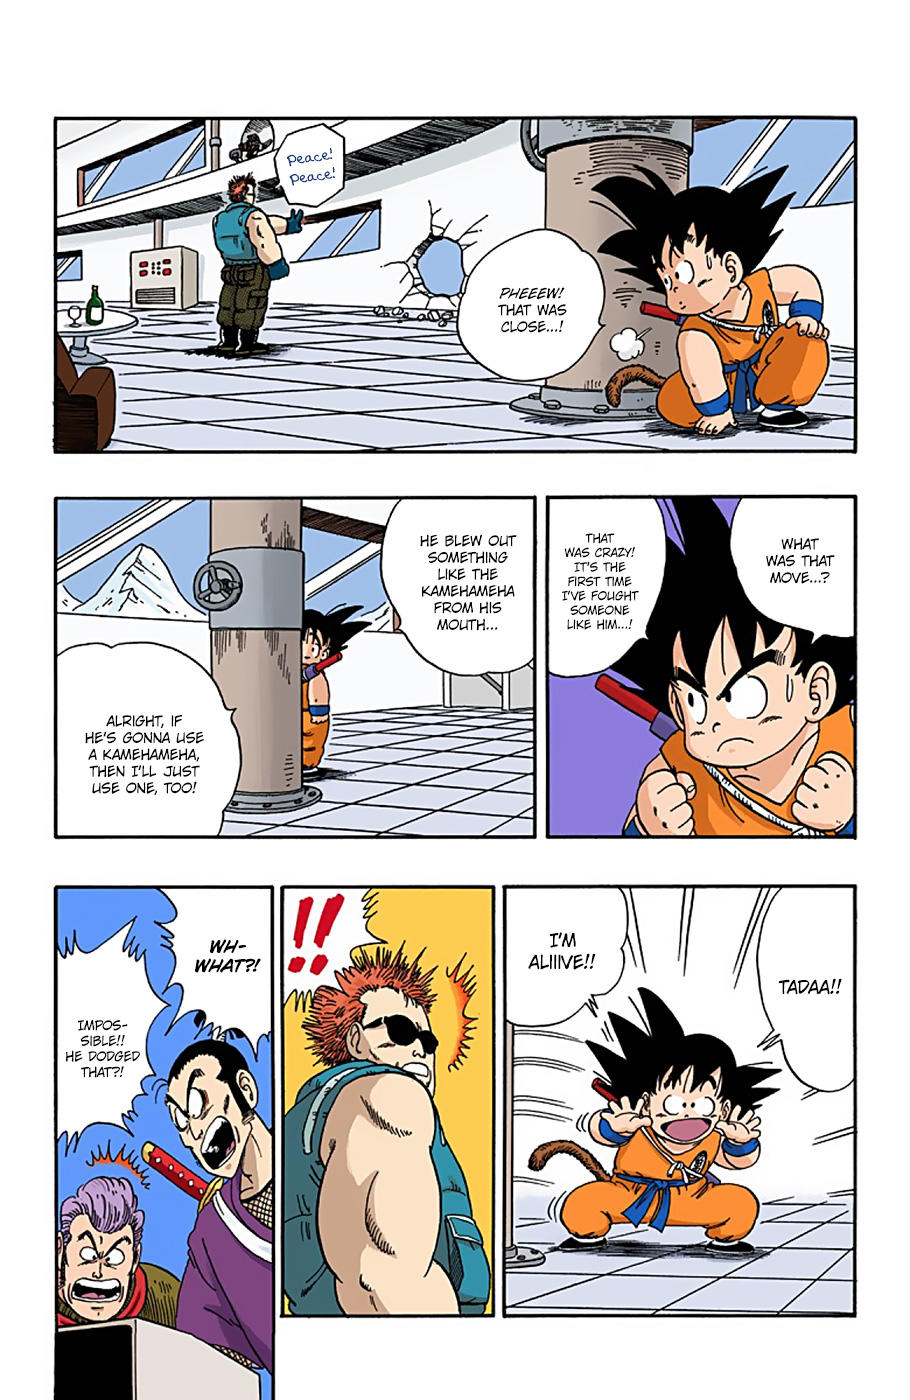 Dragon Ball - Full Color Edition Vol.5 Chapter 59: The Demon On The Third Floor!! page 9 - Mangakakalot